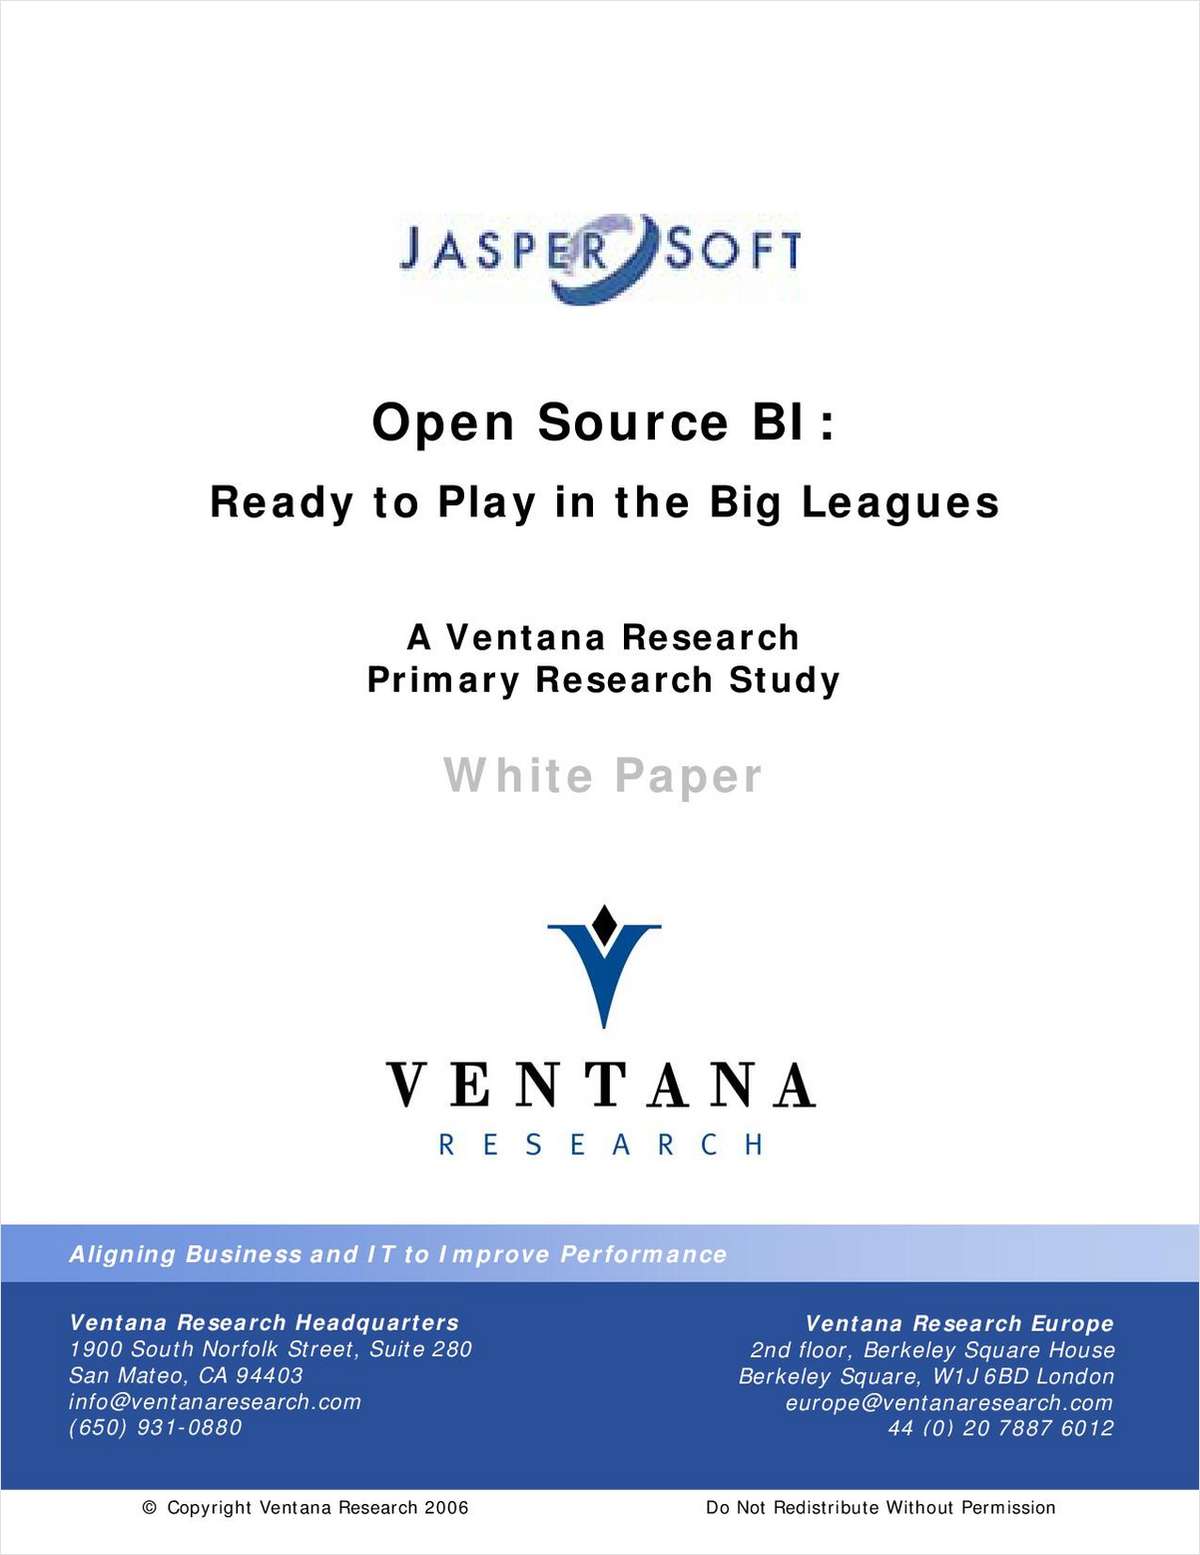 Open Source Business Intelligence: Ready to Play in the Big Leagues